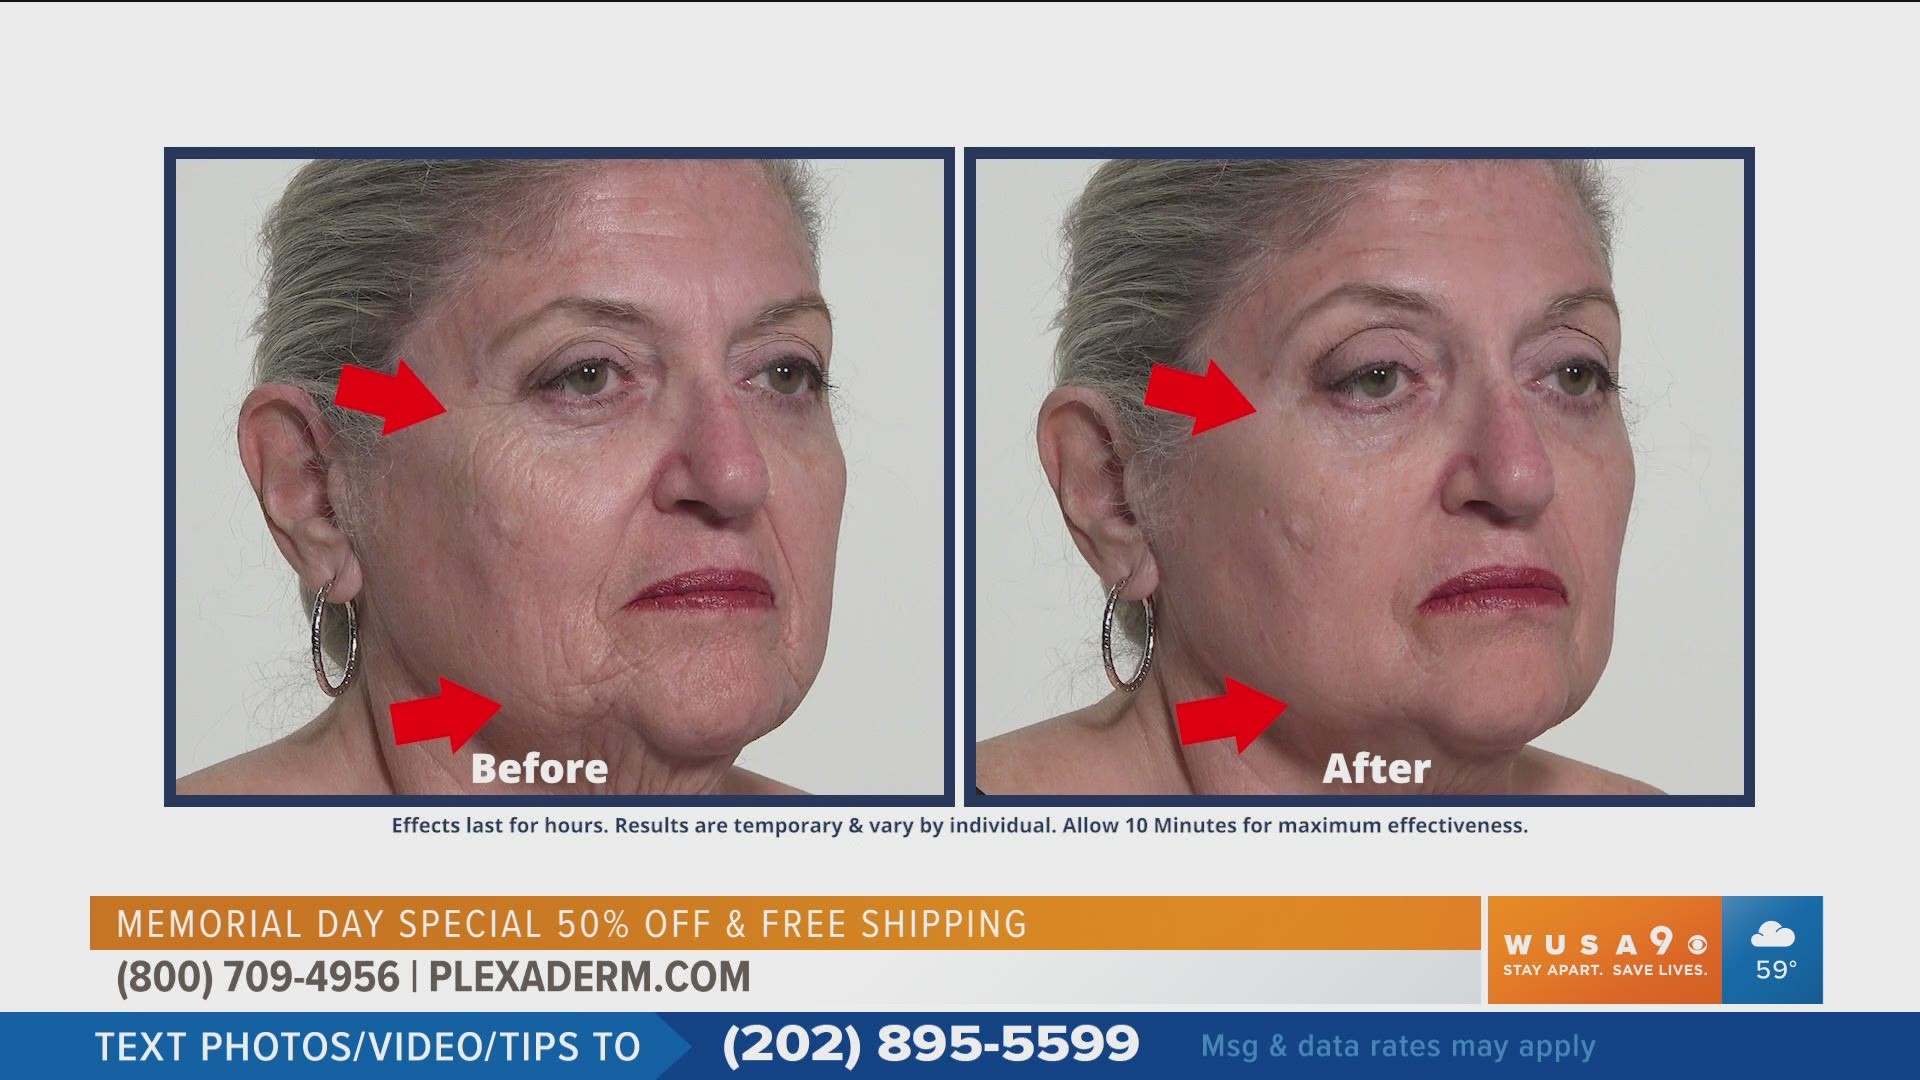 Get a firm and more youthful look with Plexaderm. The Memorial Day Special includes 50% off and free shipping! Sponsored by Plexaderm,